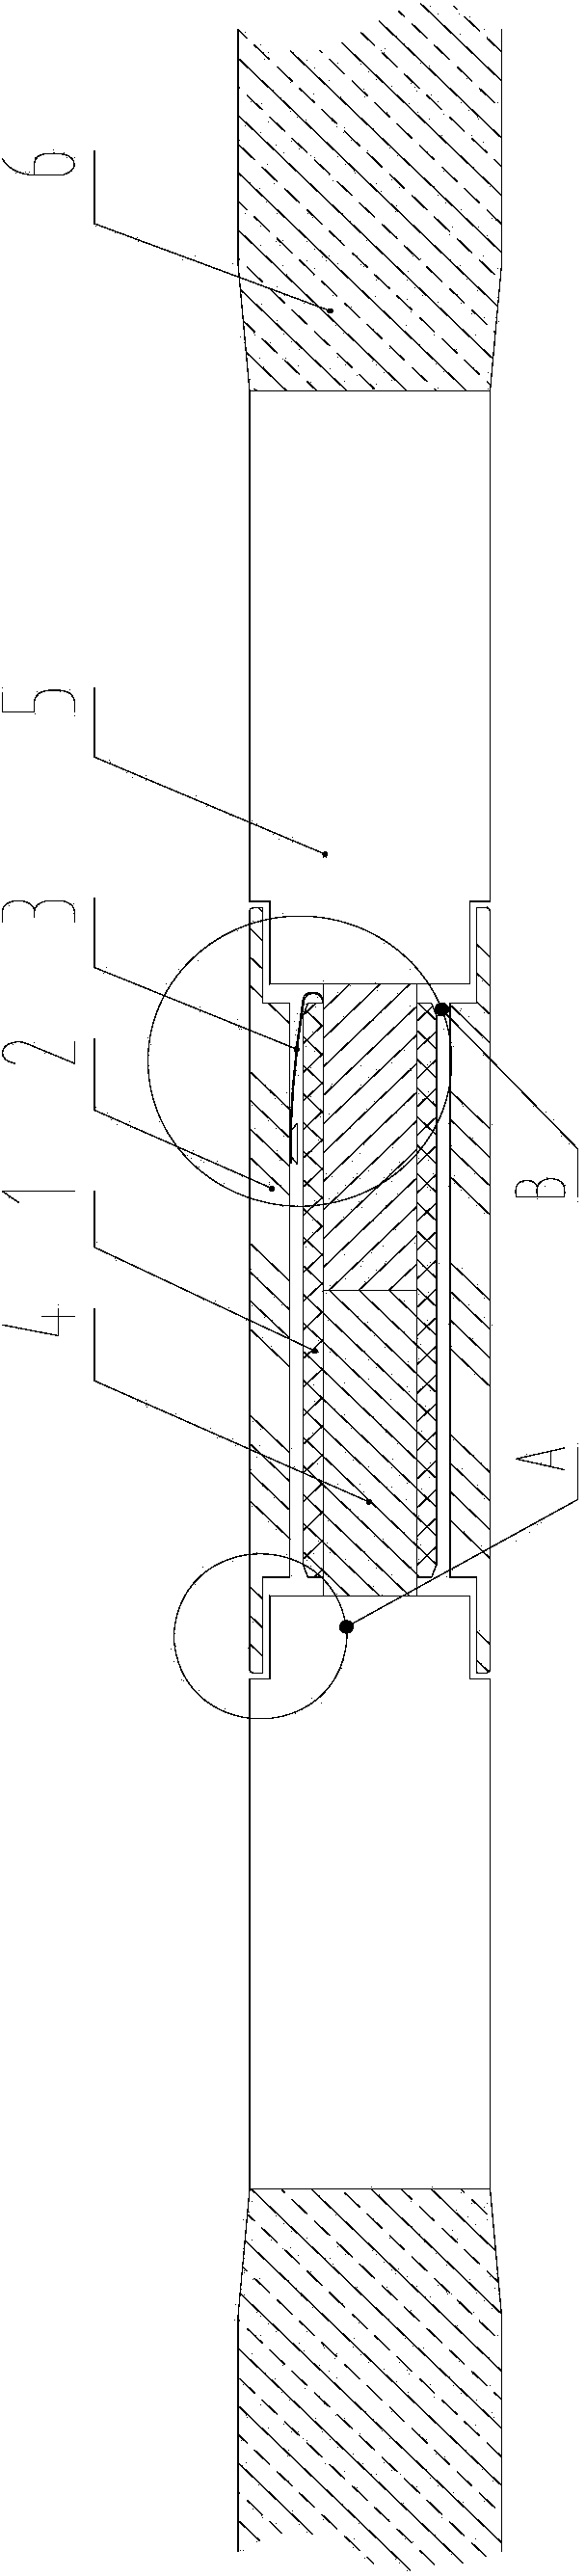 Cable connection device and method